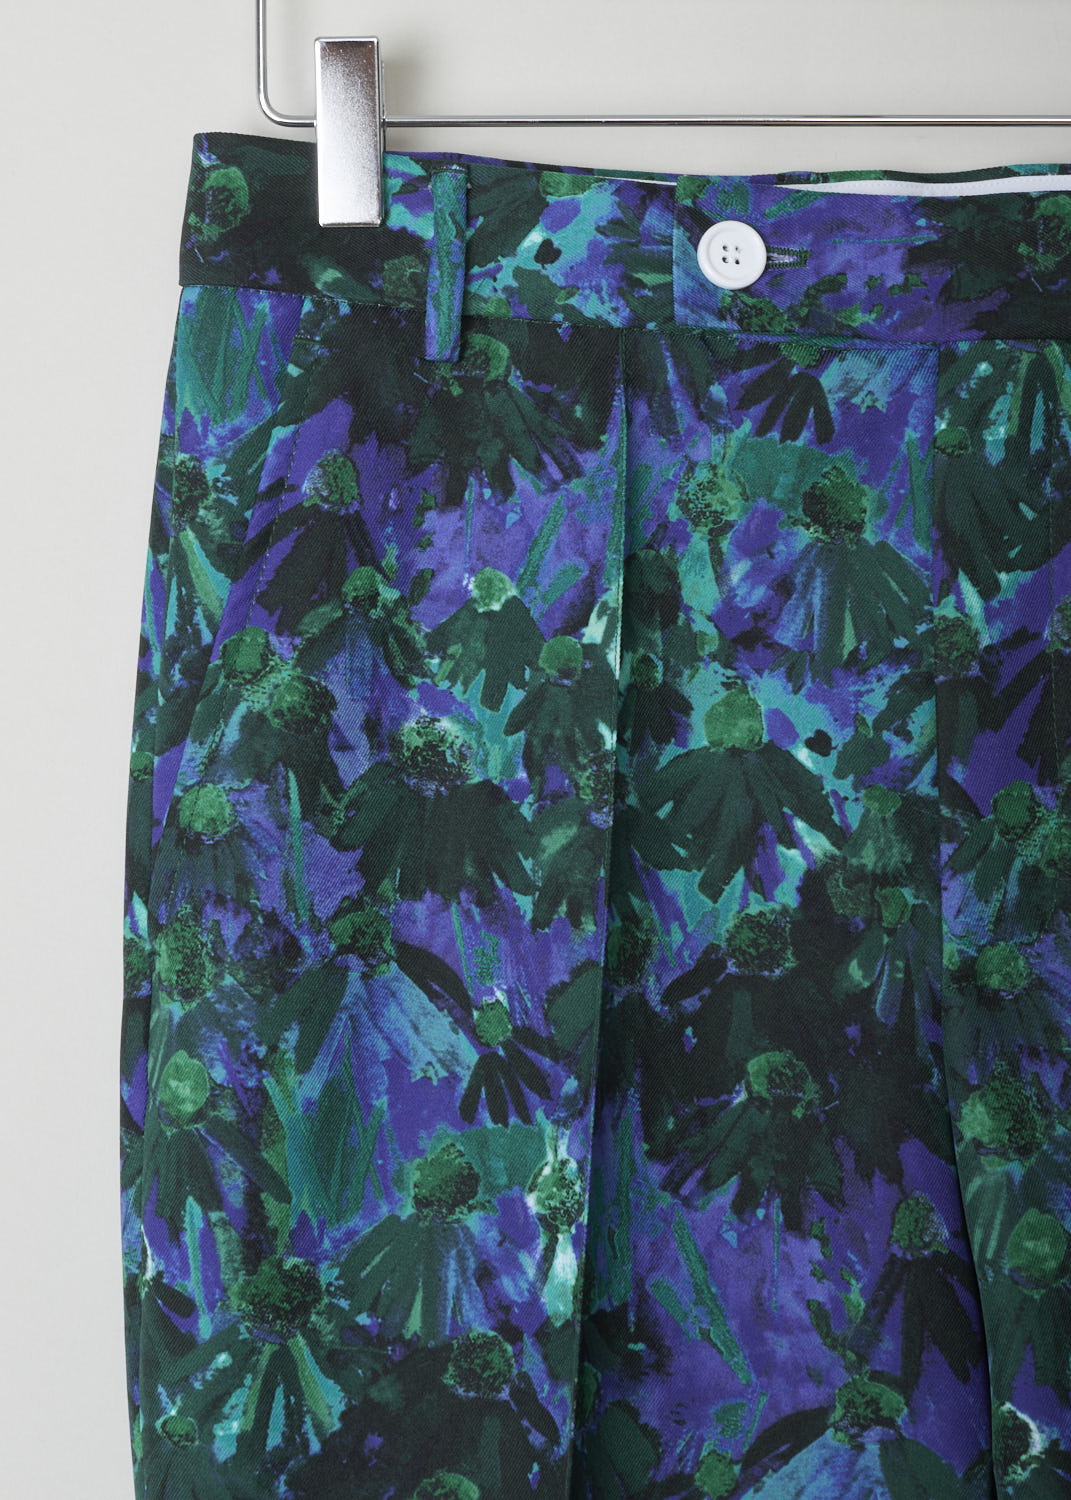 PLAN C,  MULTICOLORED FLORAL TROUSERS, PNCAA06B08_TP069_FIV02_GREEN_CLOVER, Print, Detail, These multicolored floral trousers have belt loops, a contrasting white button and a concealed zip fastening as well as slanted pockets in the front and buttoned welt pockets in the back. On the pant legs, centre pleats can be found front and back.
